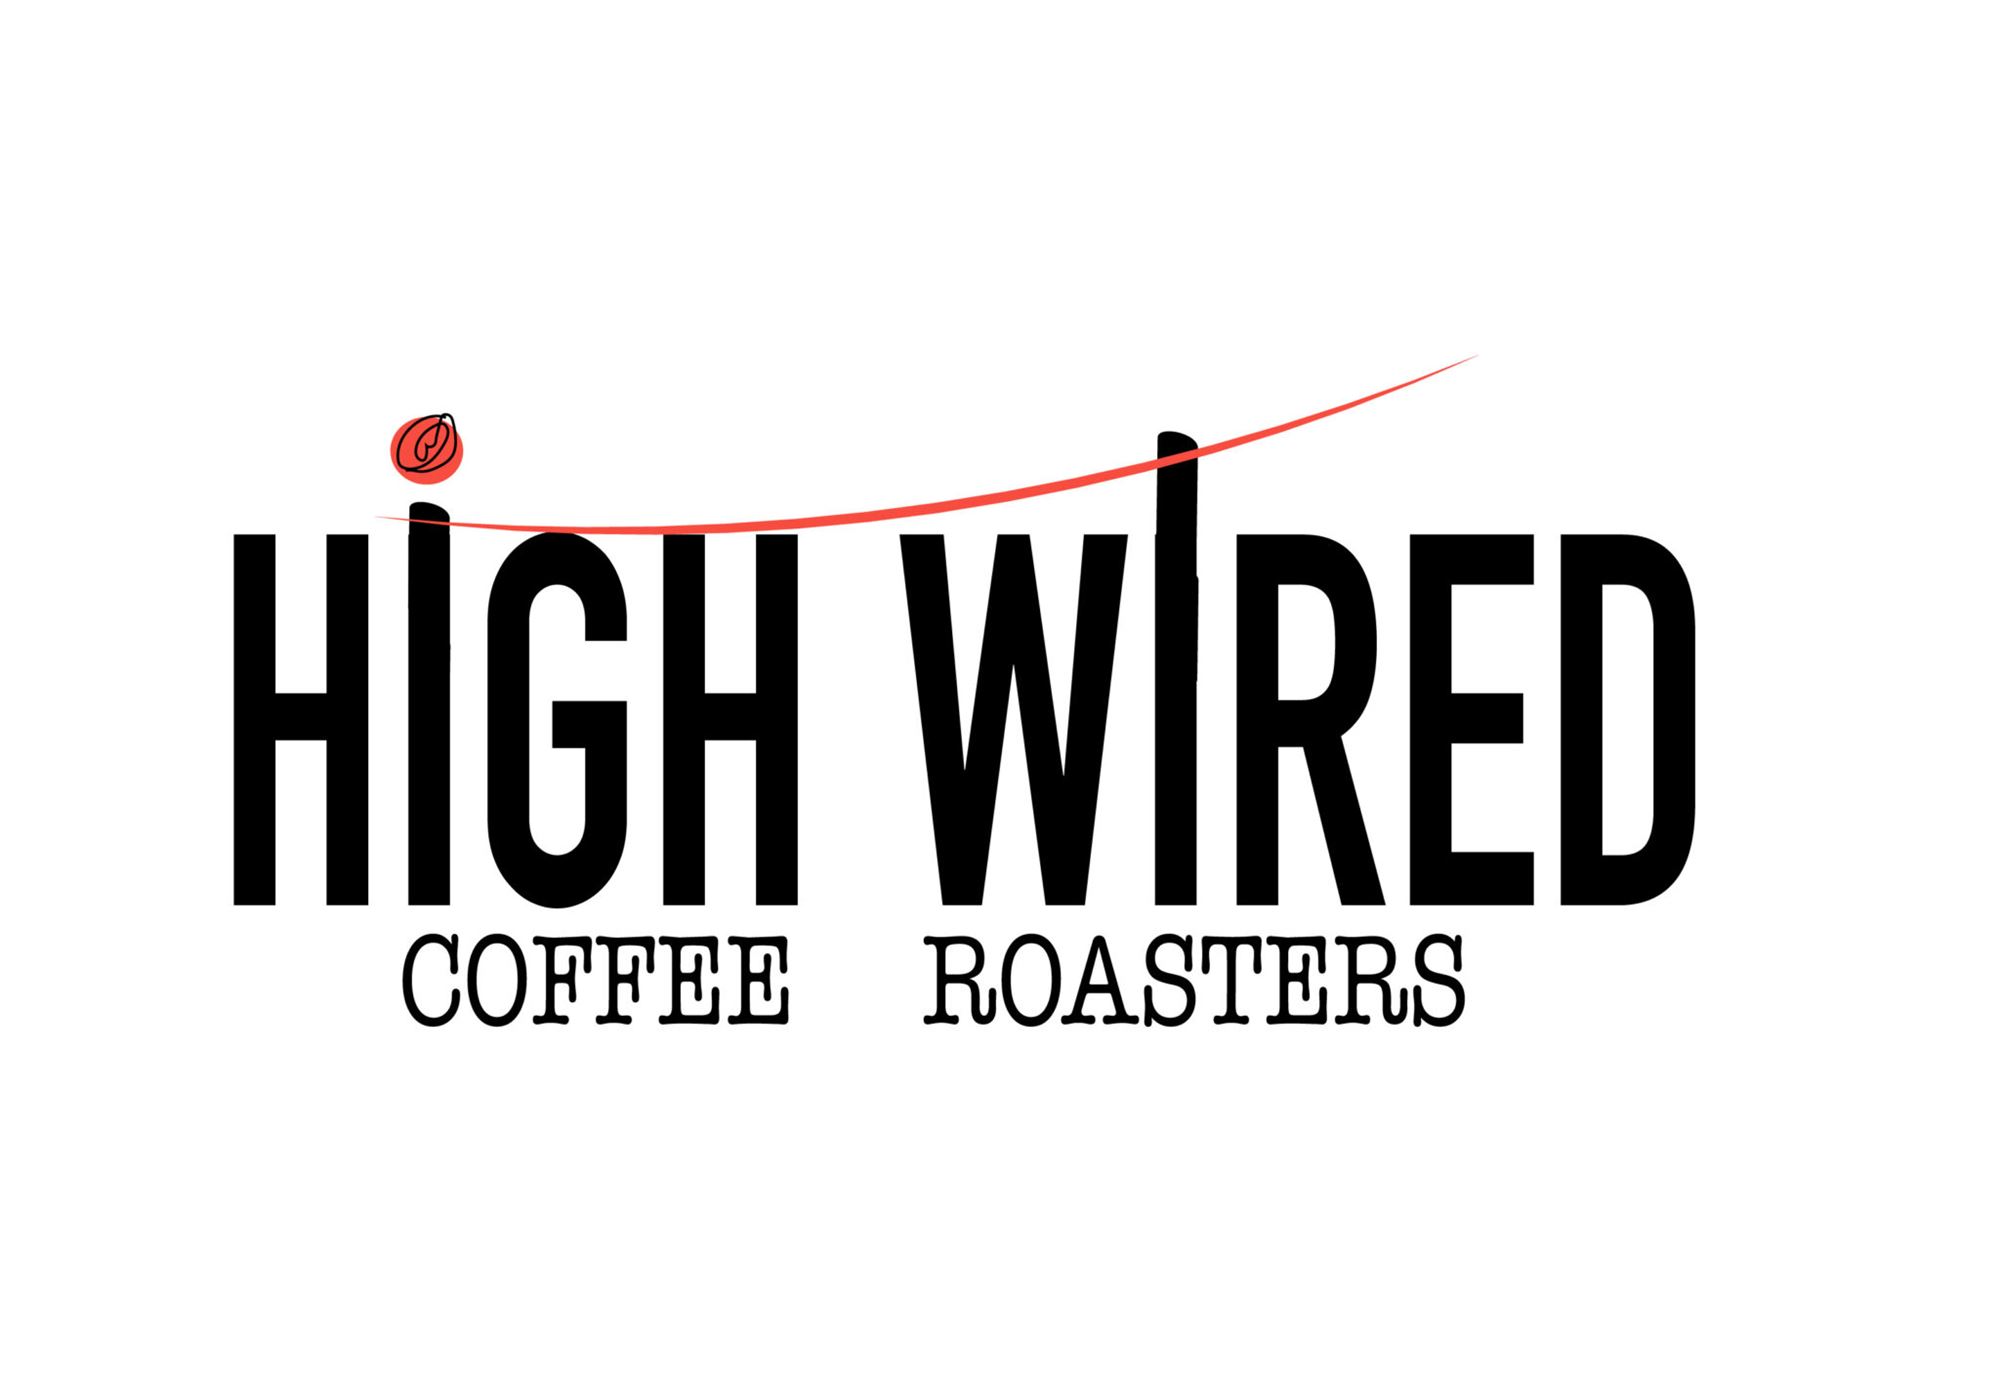 High Wired Roaster Coffee